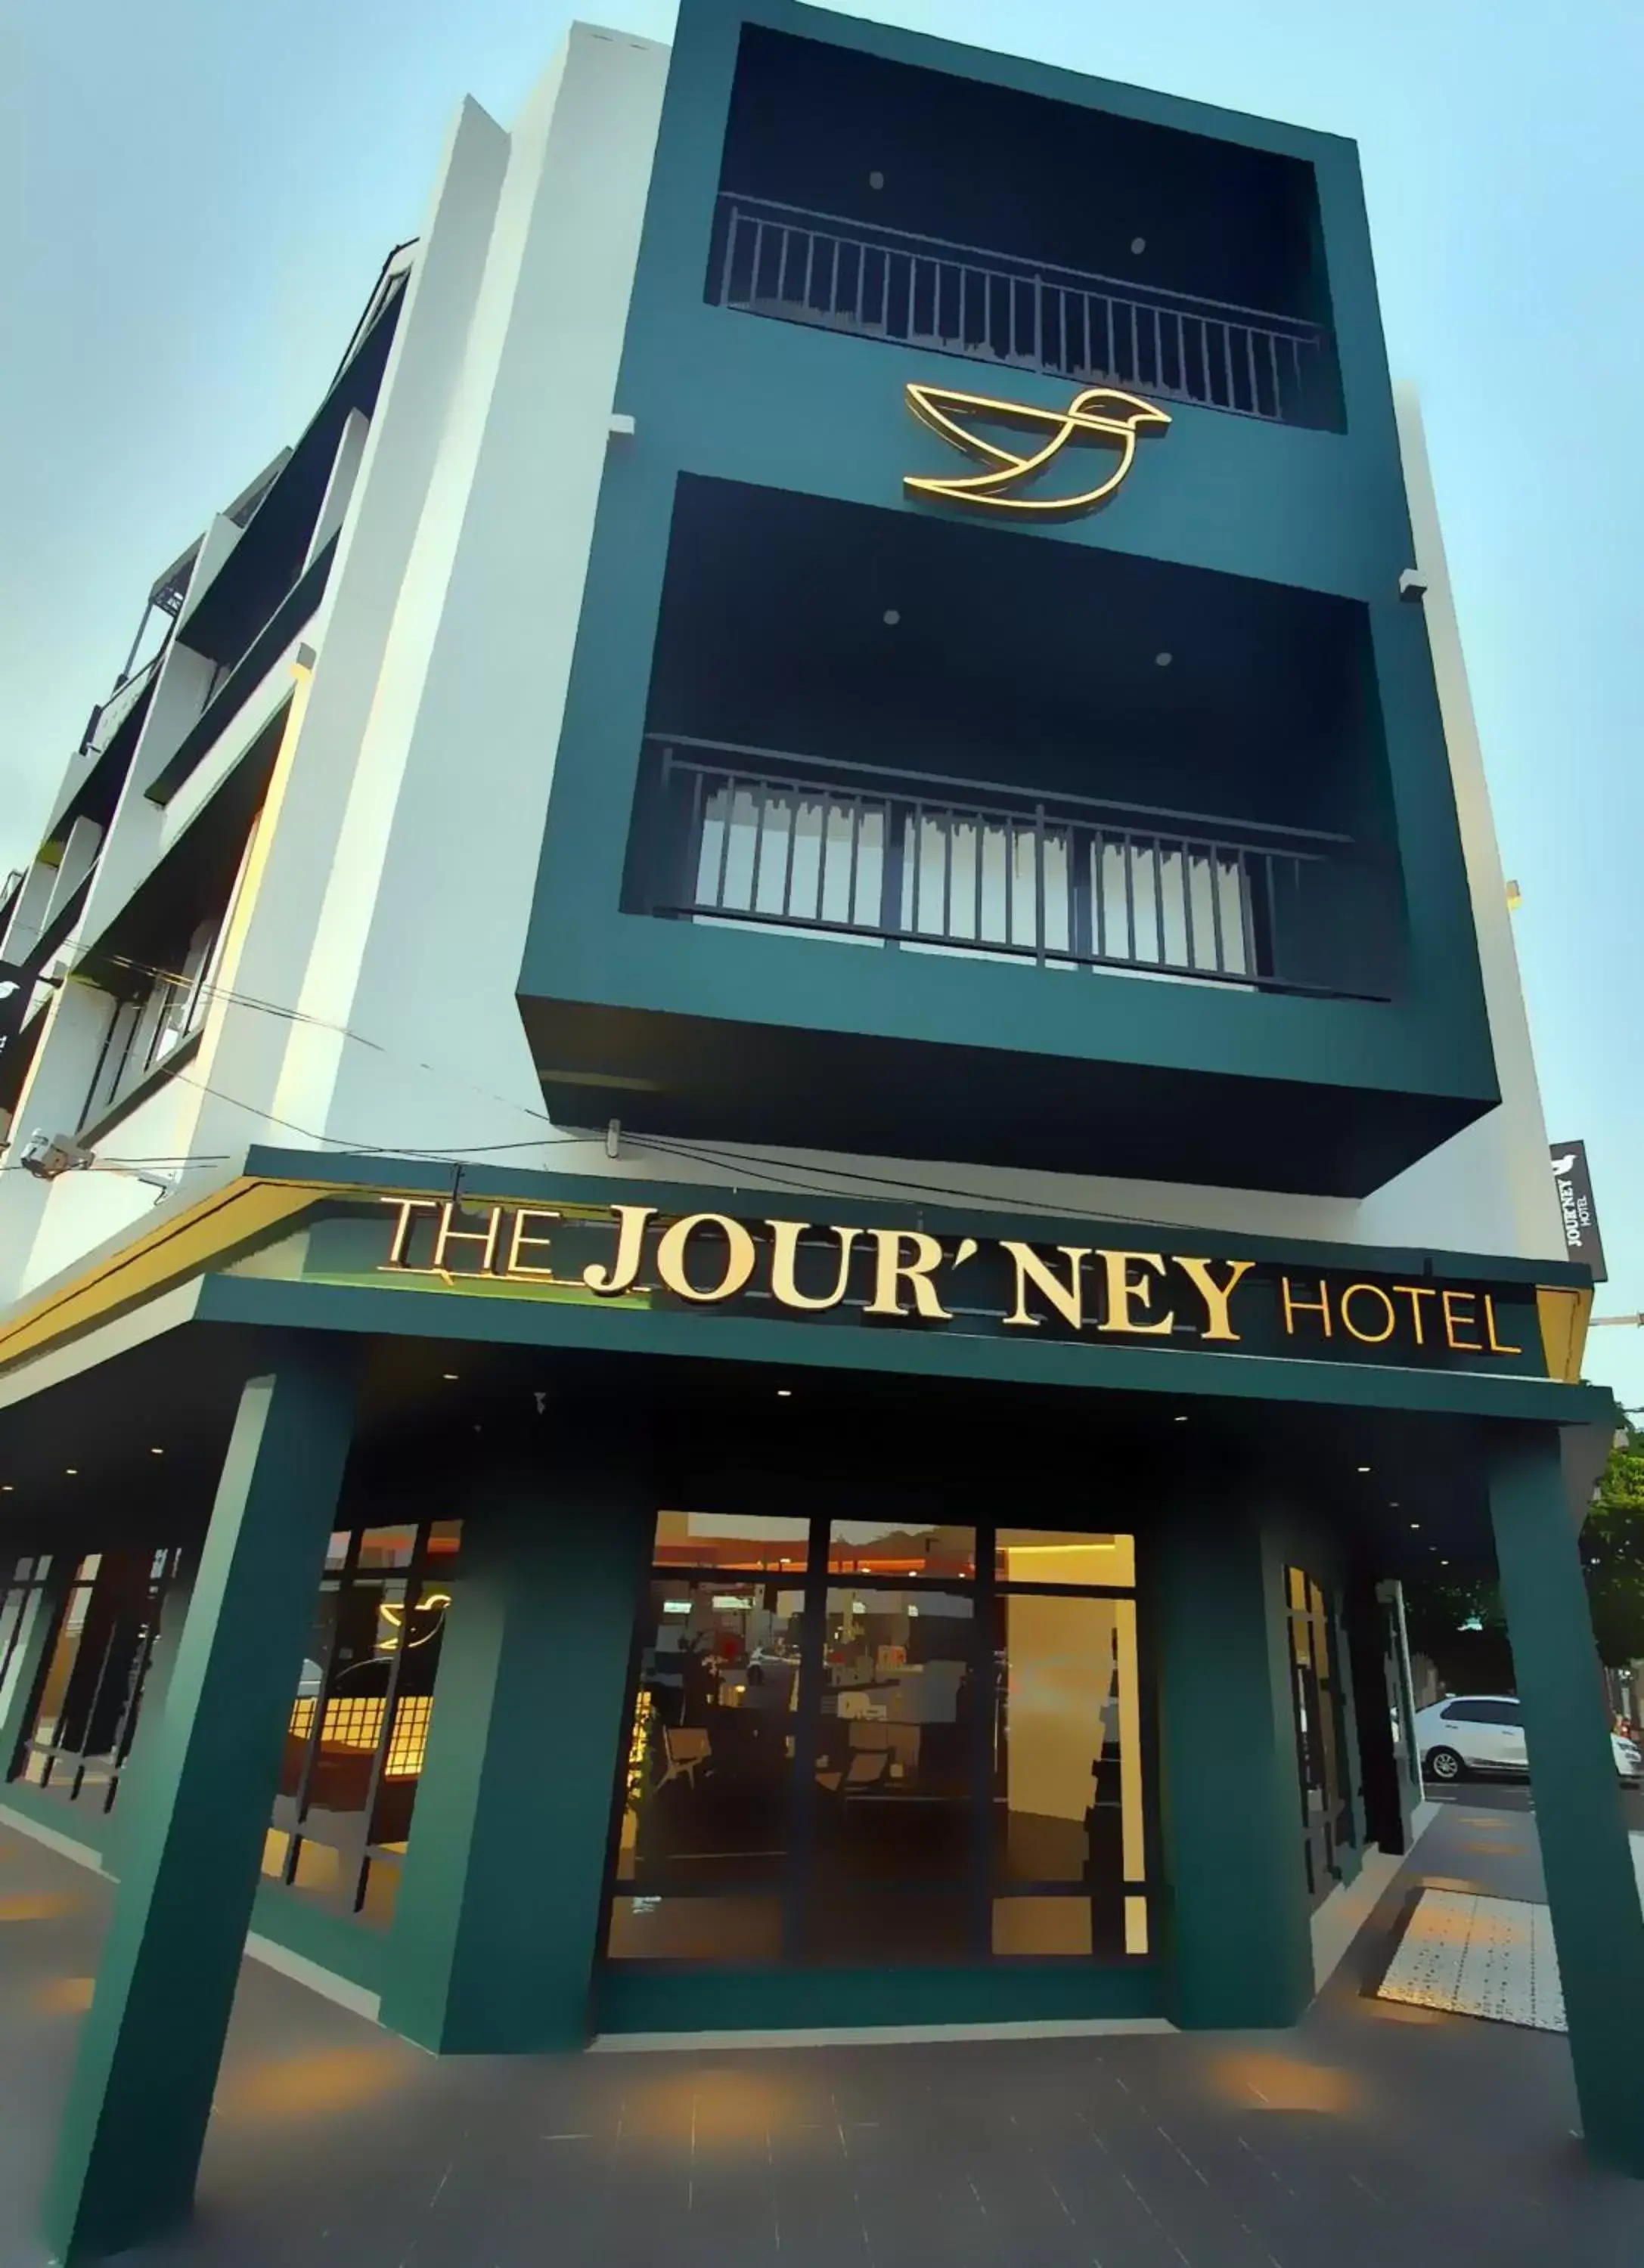 Property building in The Jour'ney hotel